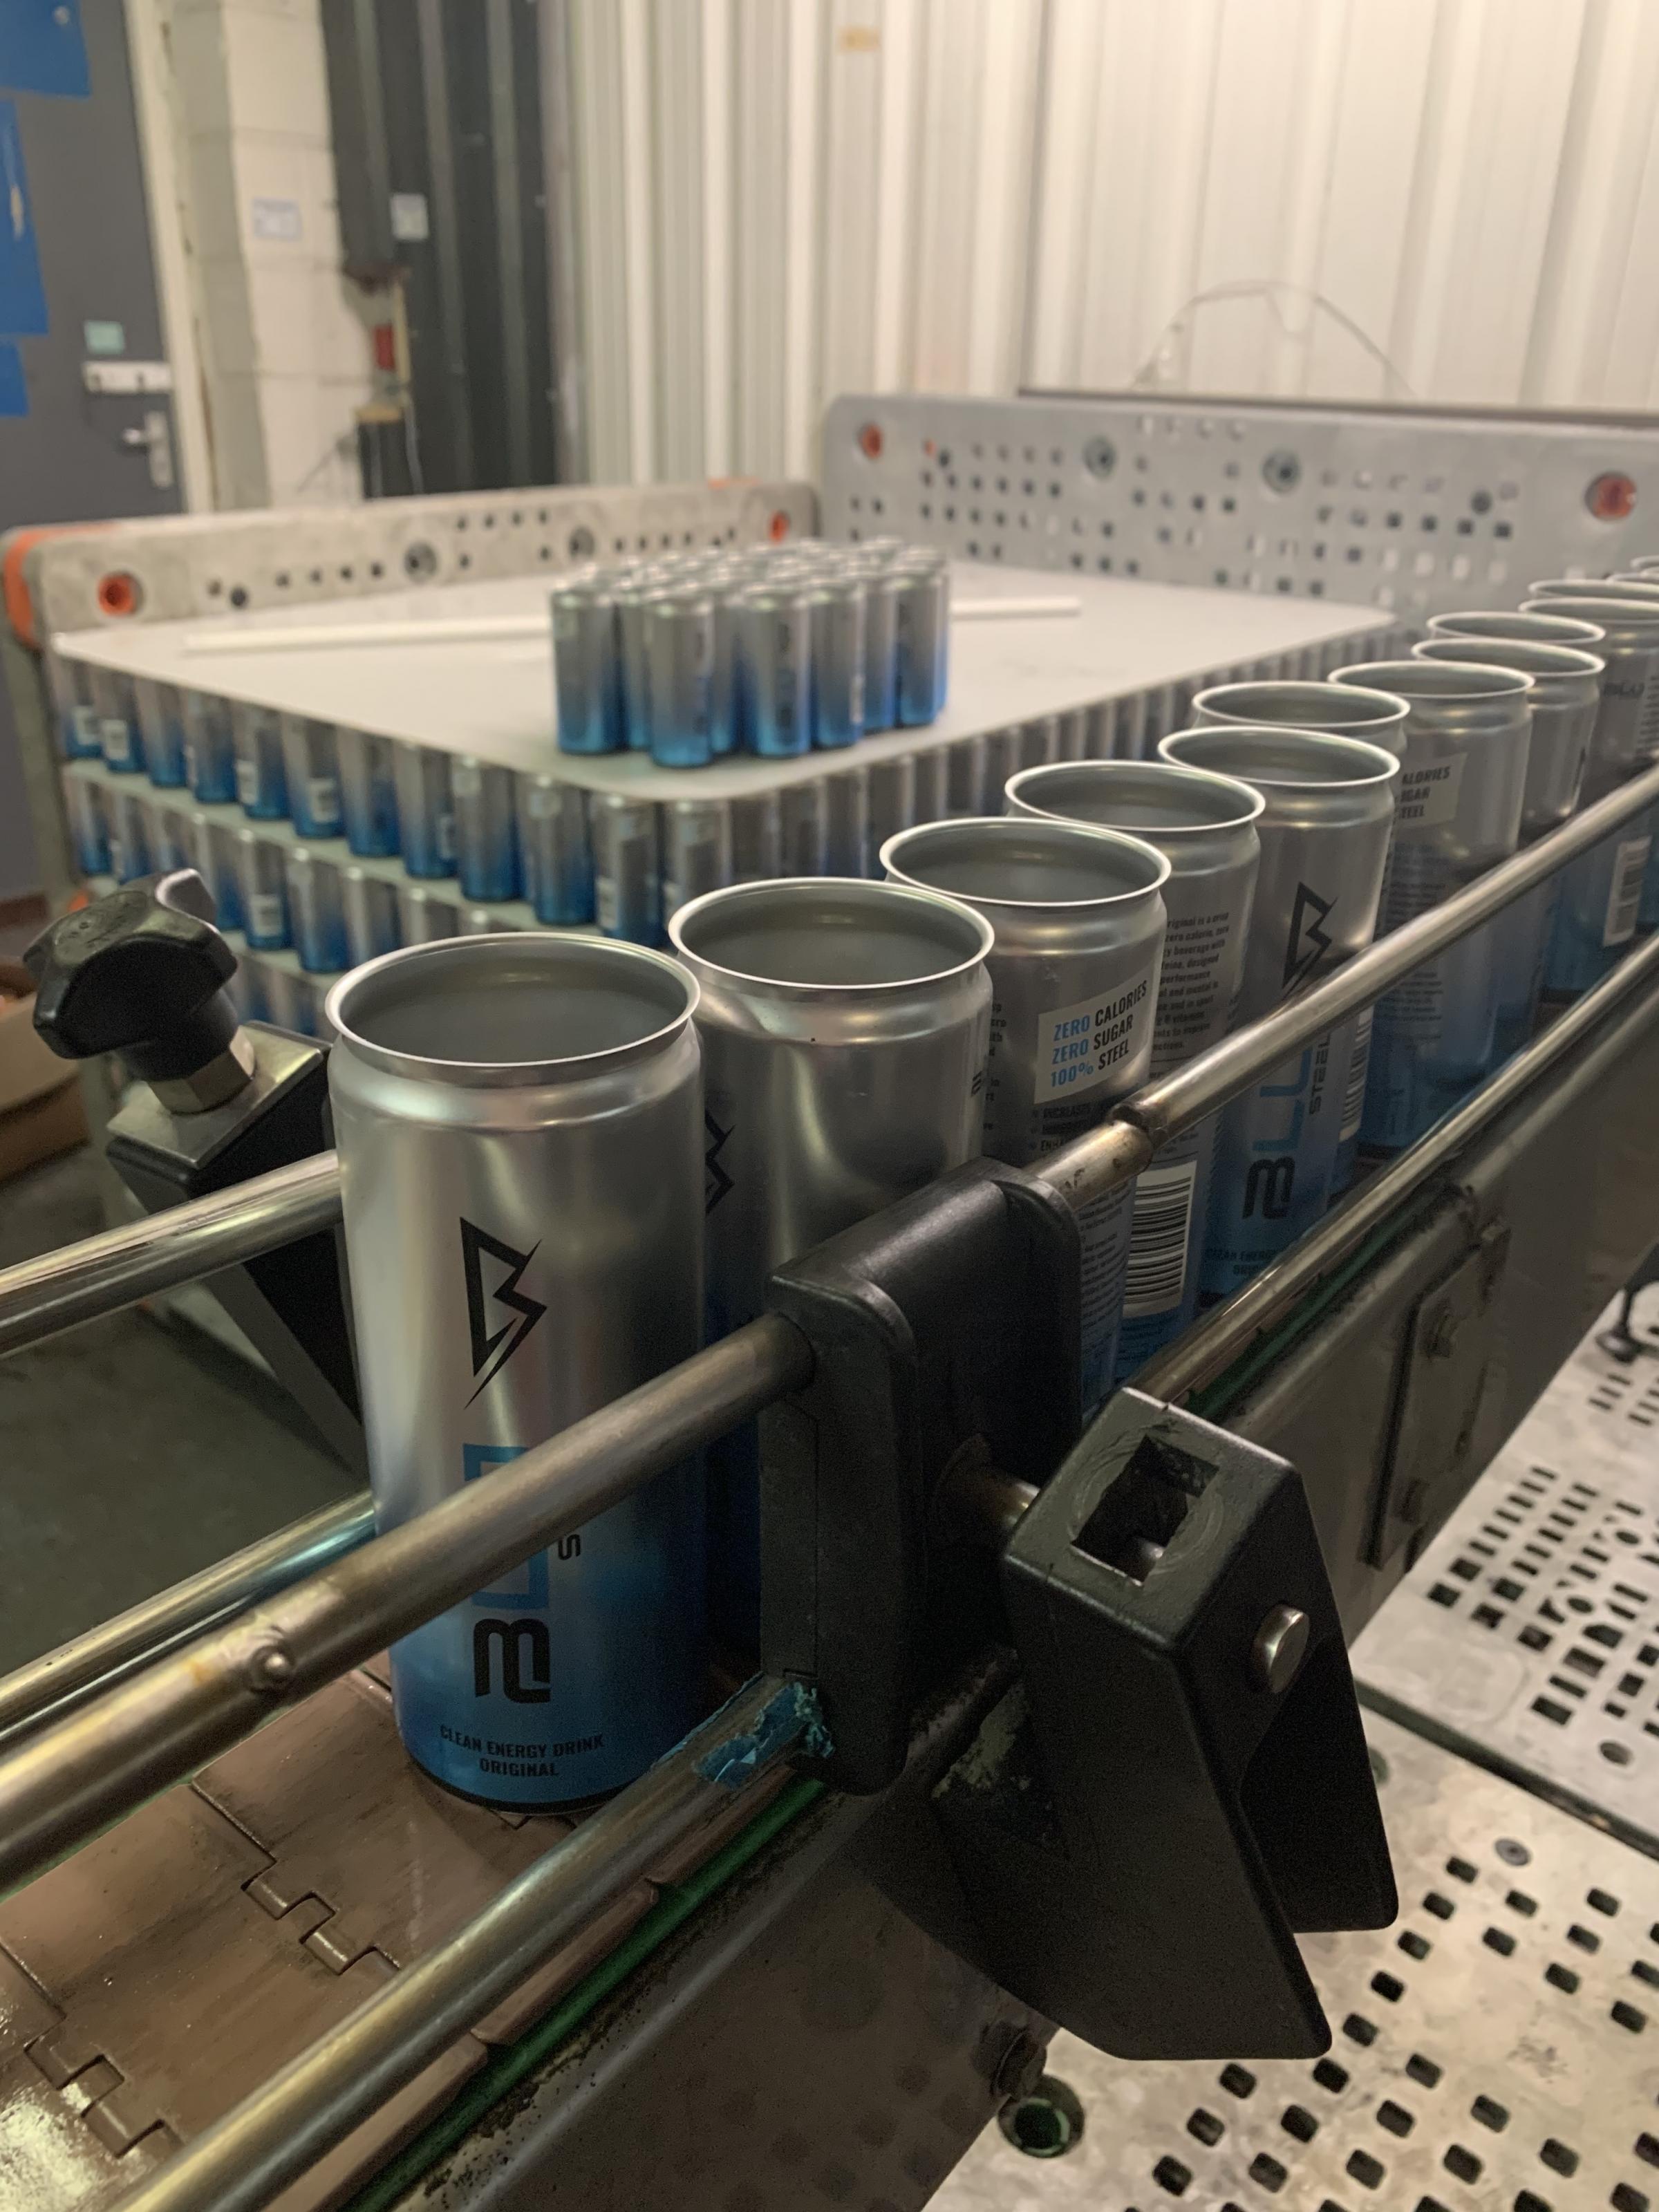 Blu Steel cans on the production line